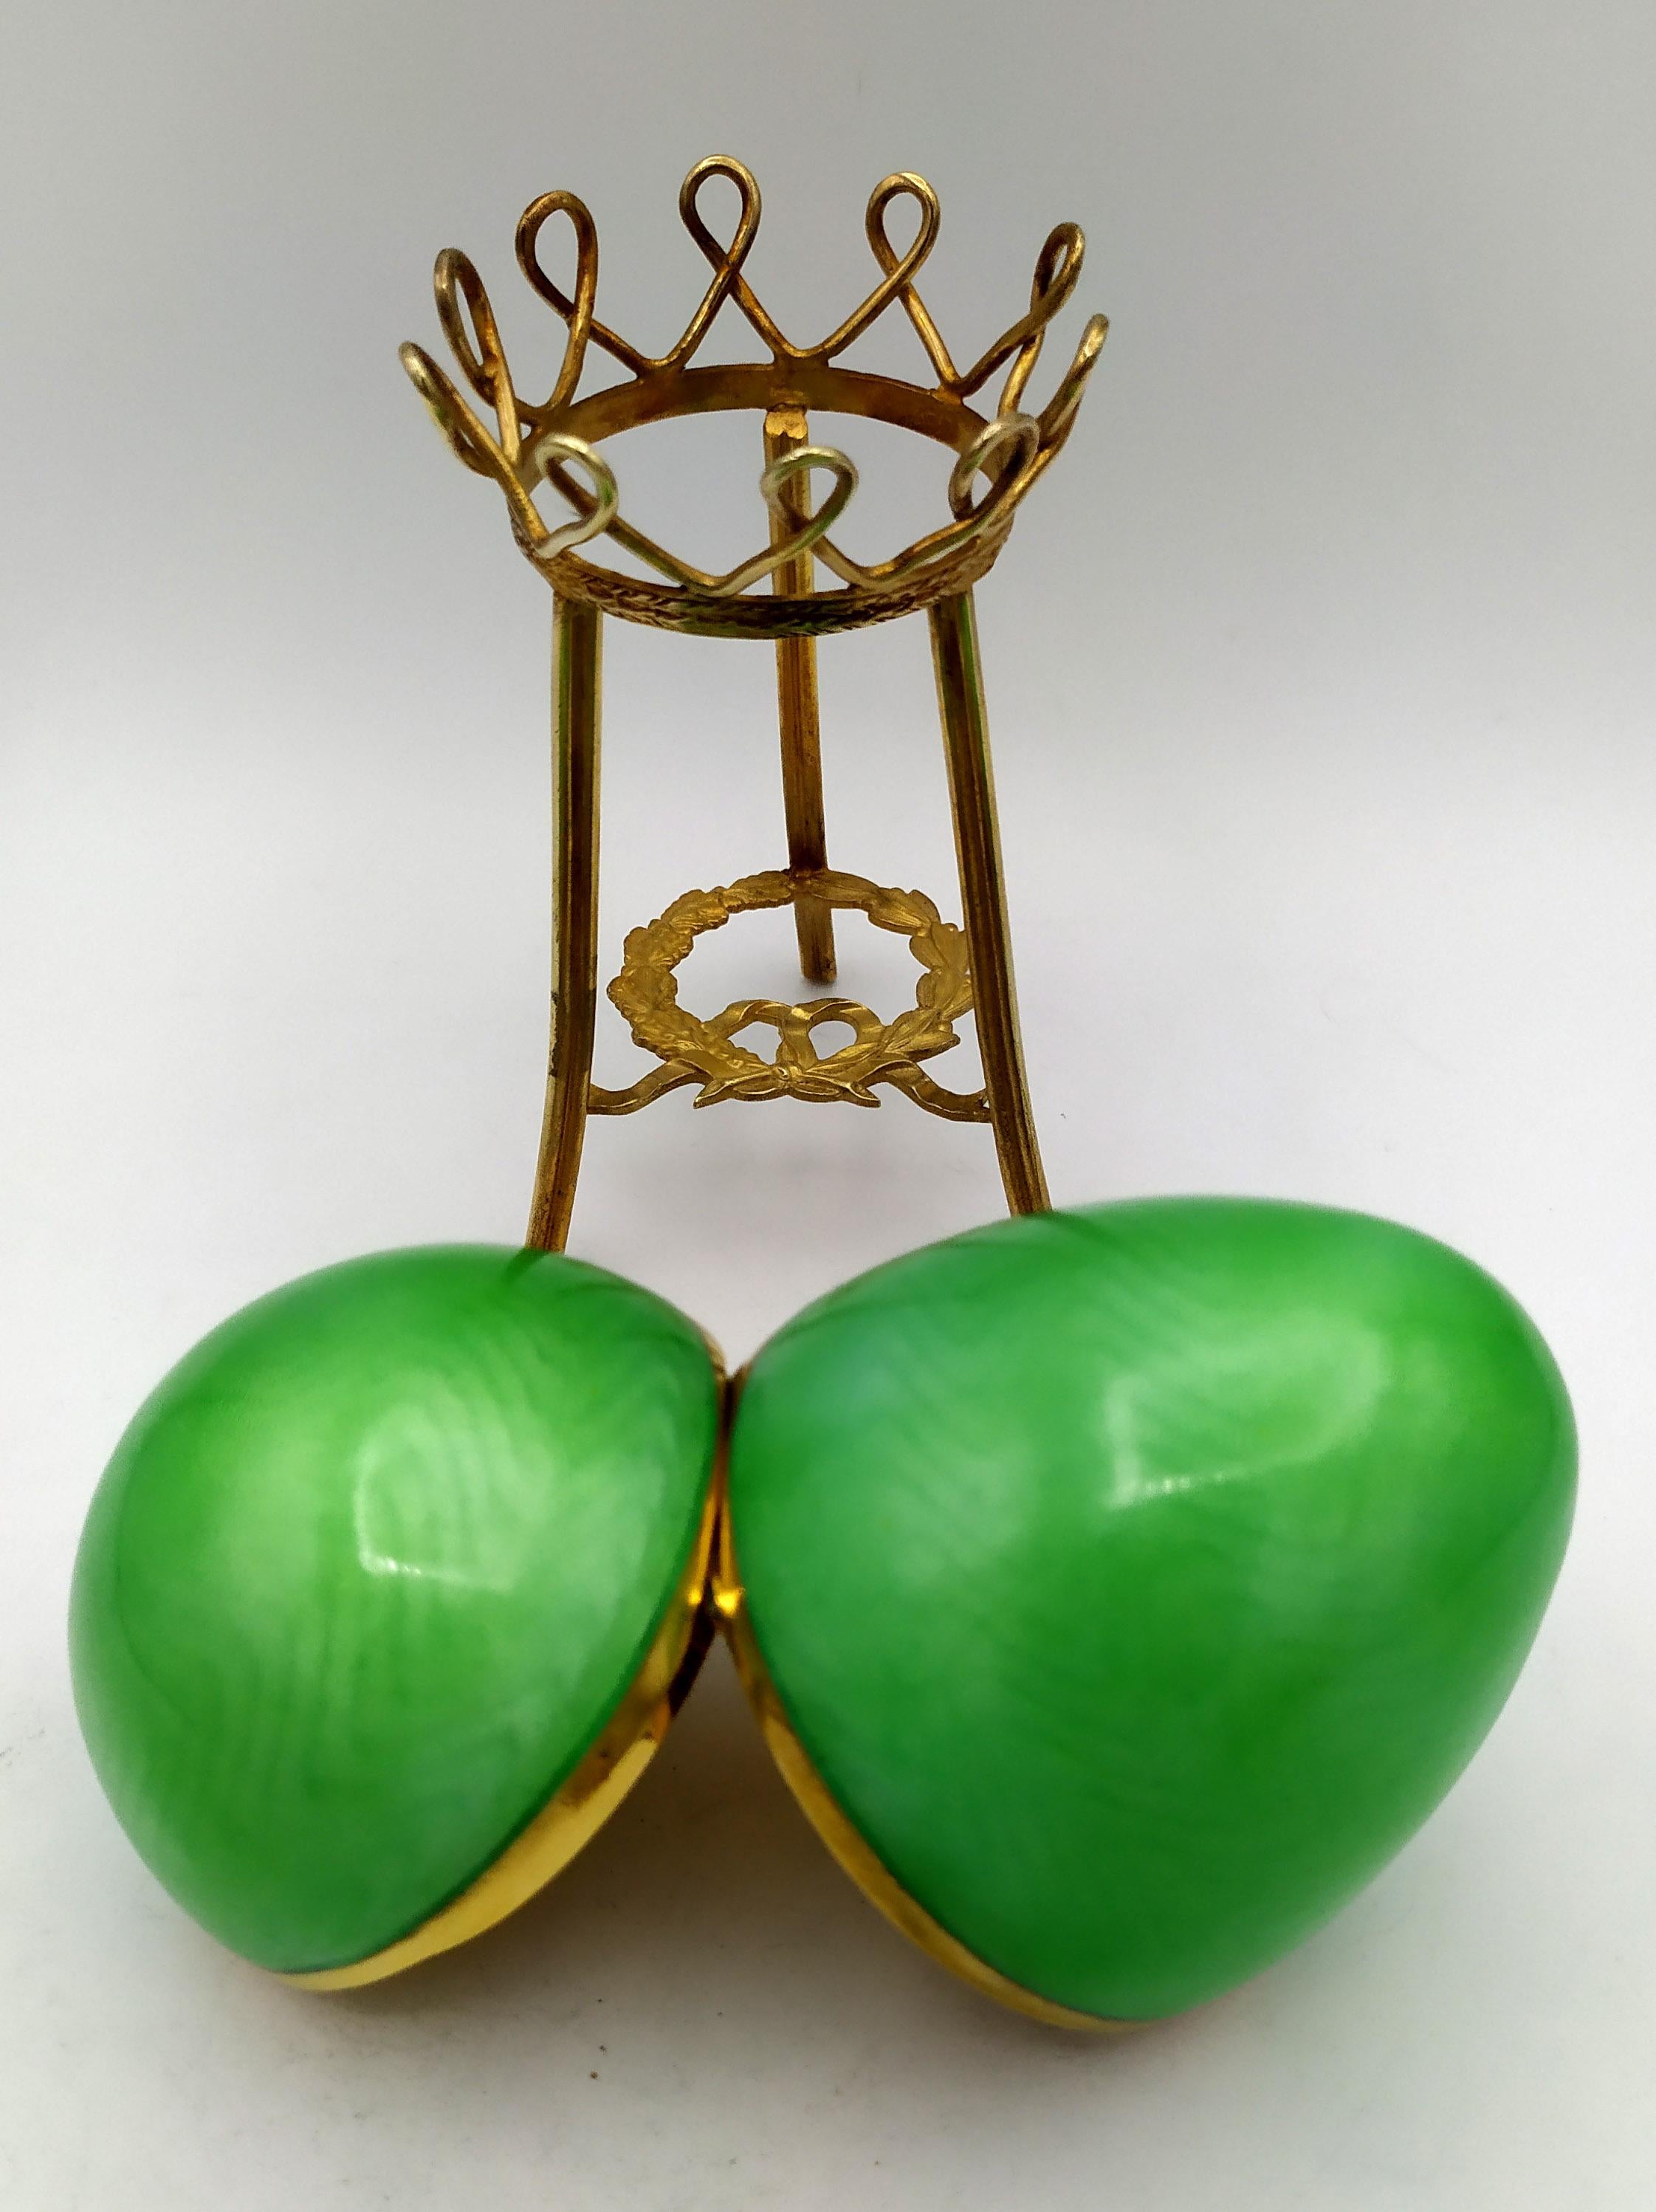 Mid-20th Century Egg Russian Empire style enamel with tall tripod Sterling Silver Salimbeni 